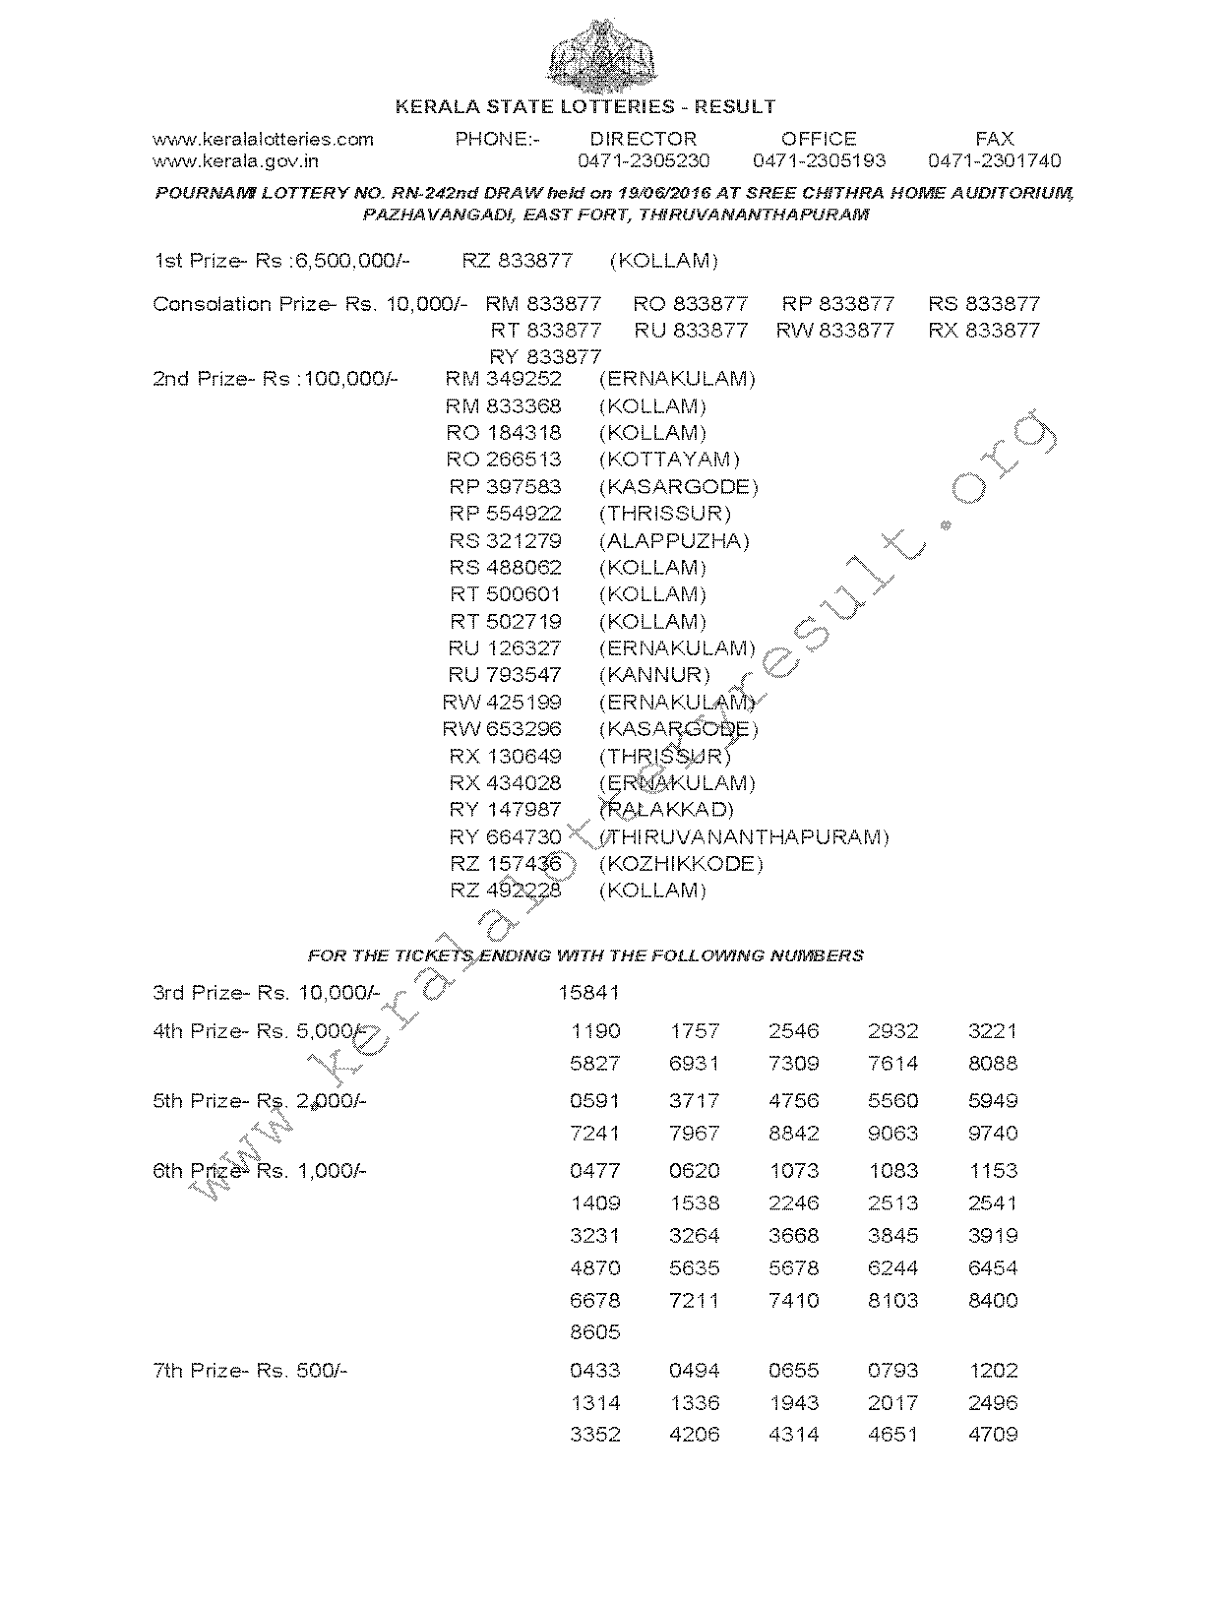 POURNAMI RN 242 Lottery Results 19-6-2016